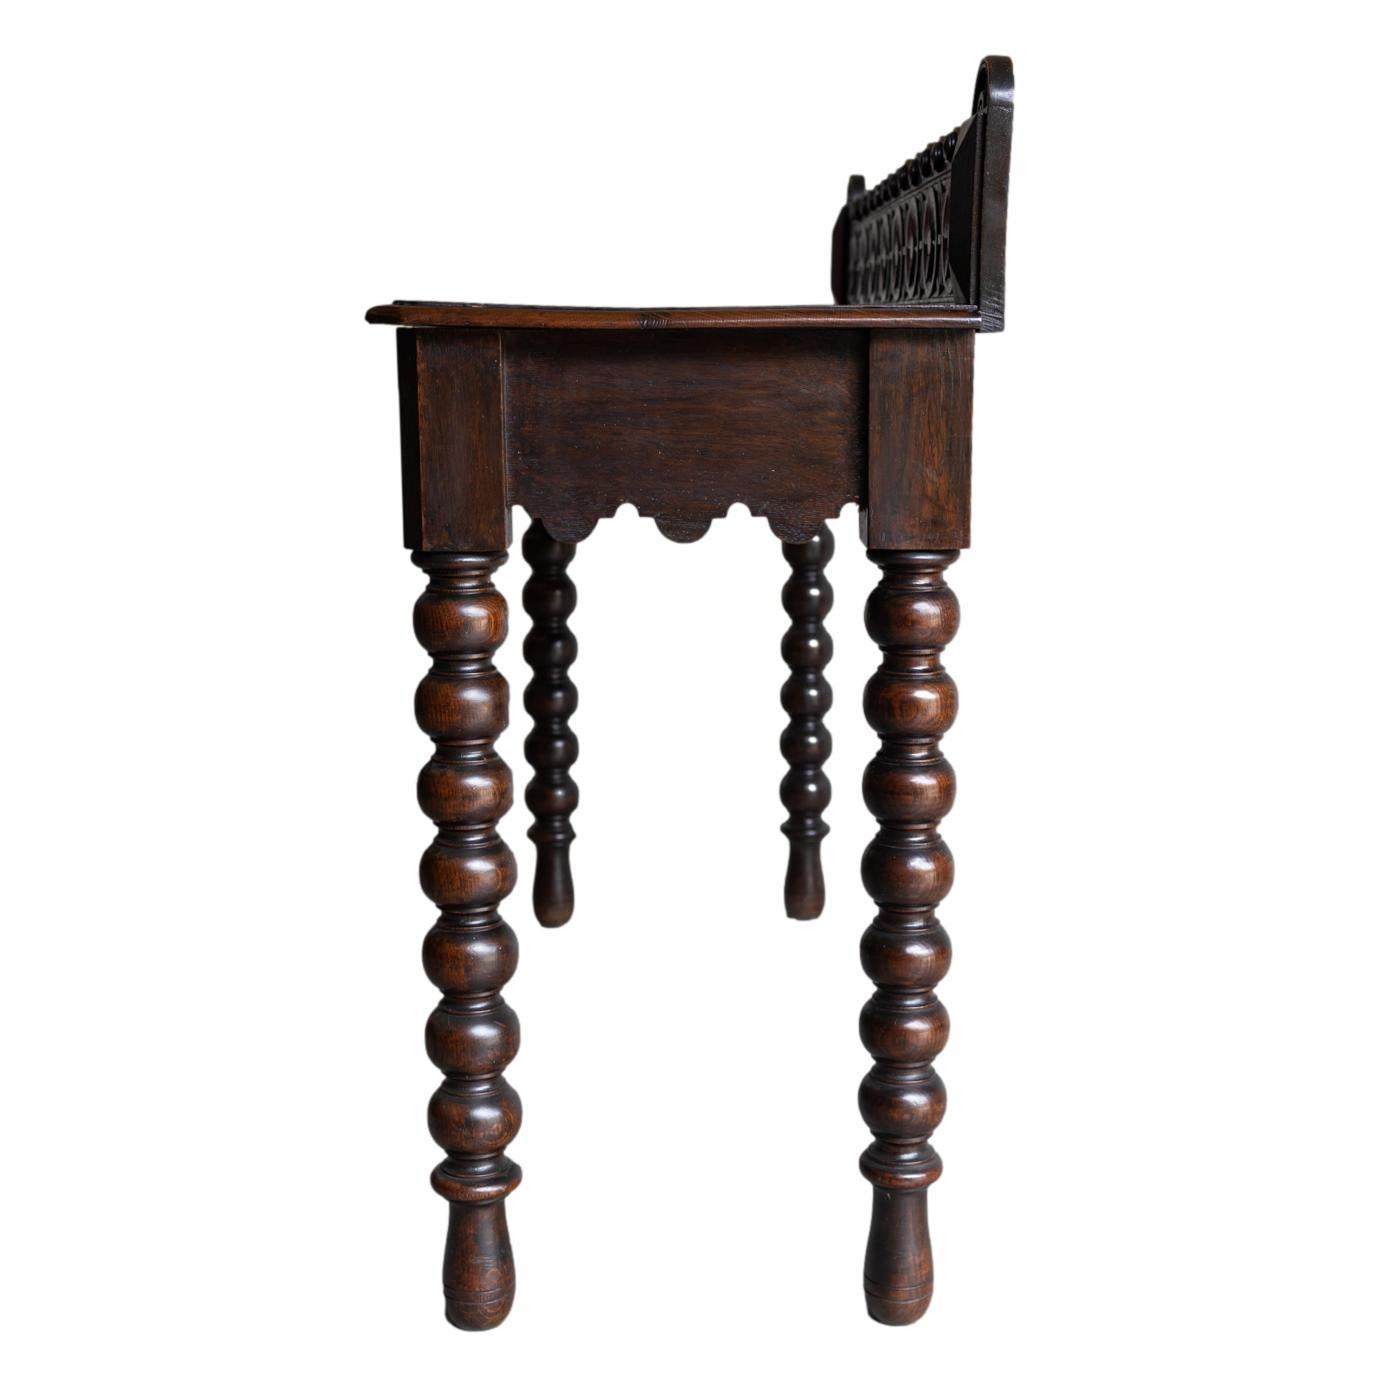 A Gothic Hand-Carved Oak Console Table, Hidden Frieze Drawer, English, ca. 1870 For Sale 2